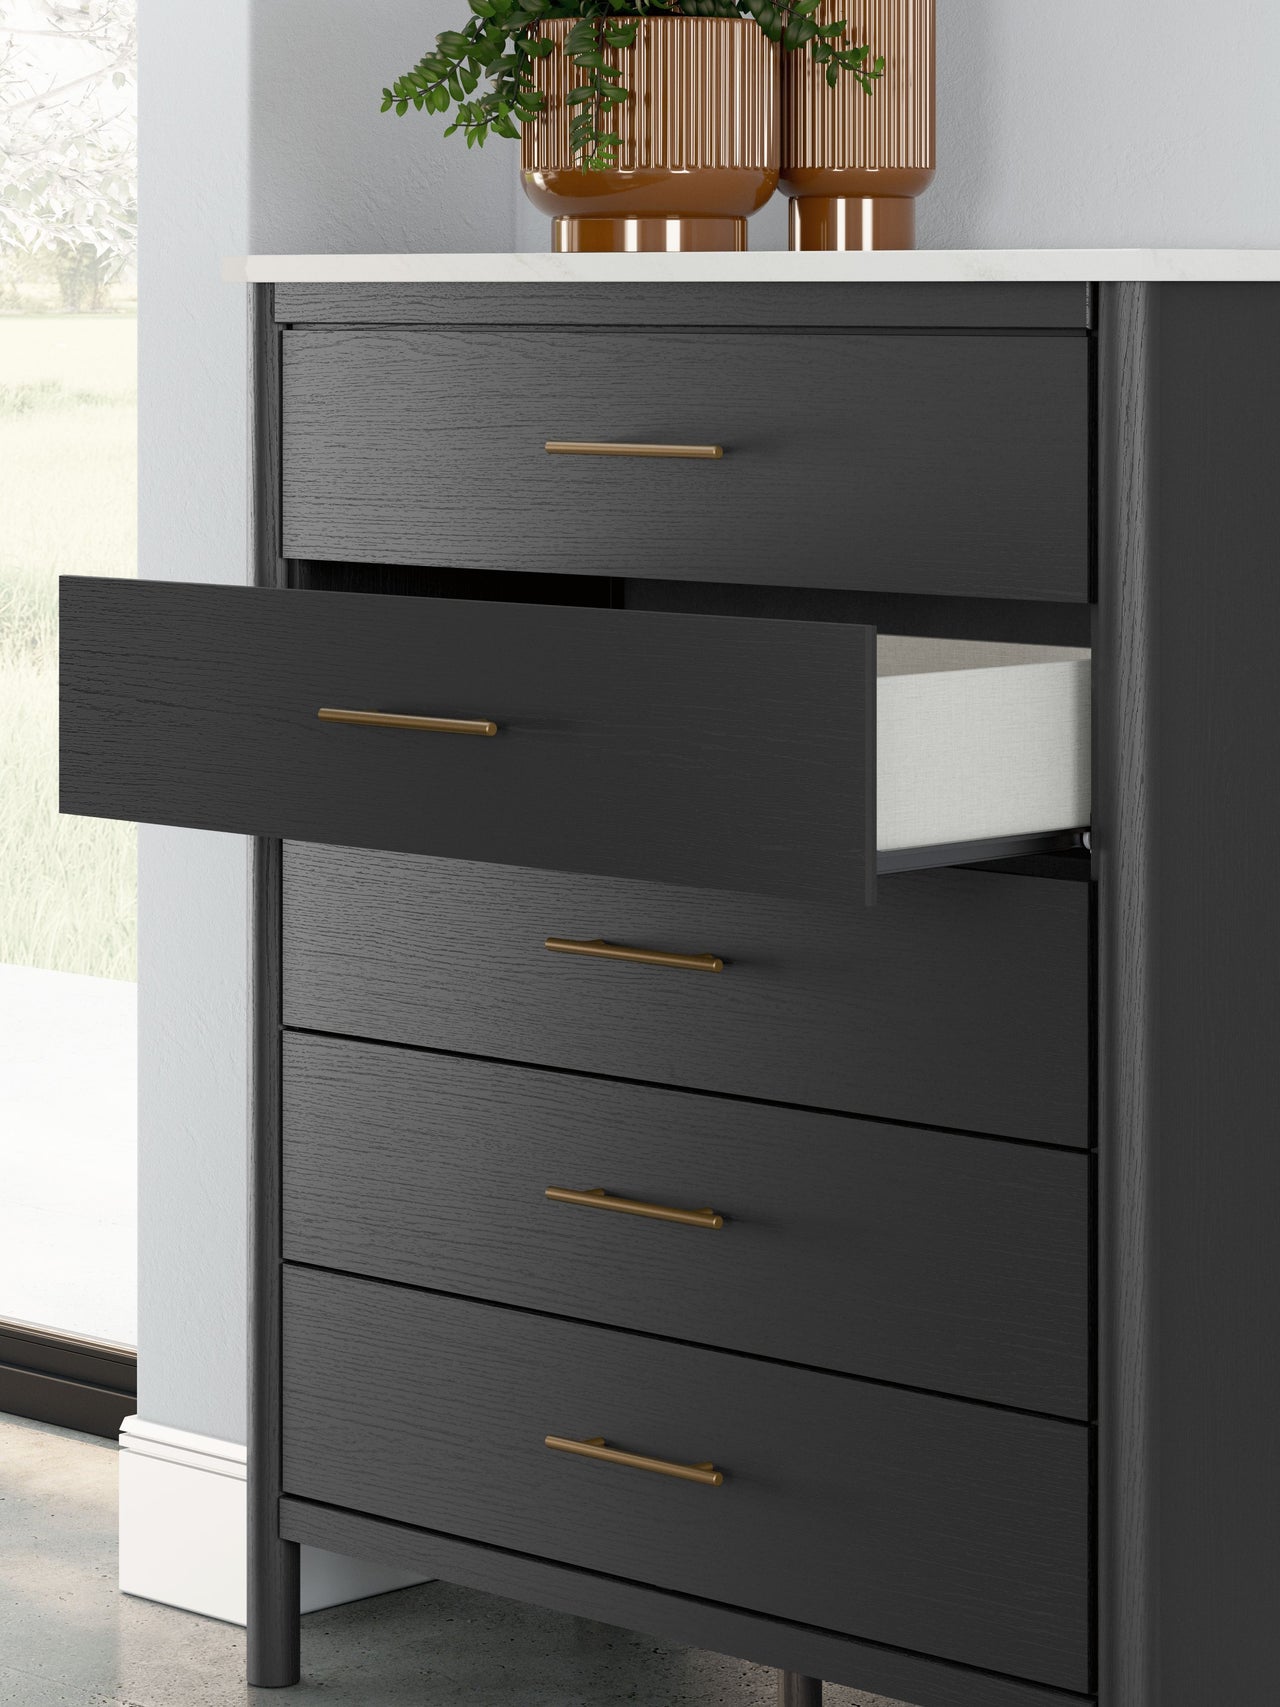 Cadmori - Five Drawer Wide Chest - Tony's Home Furnishings